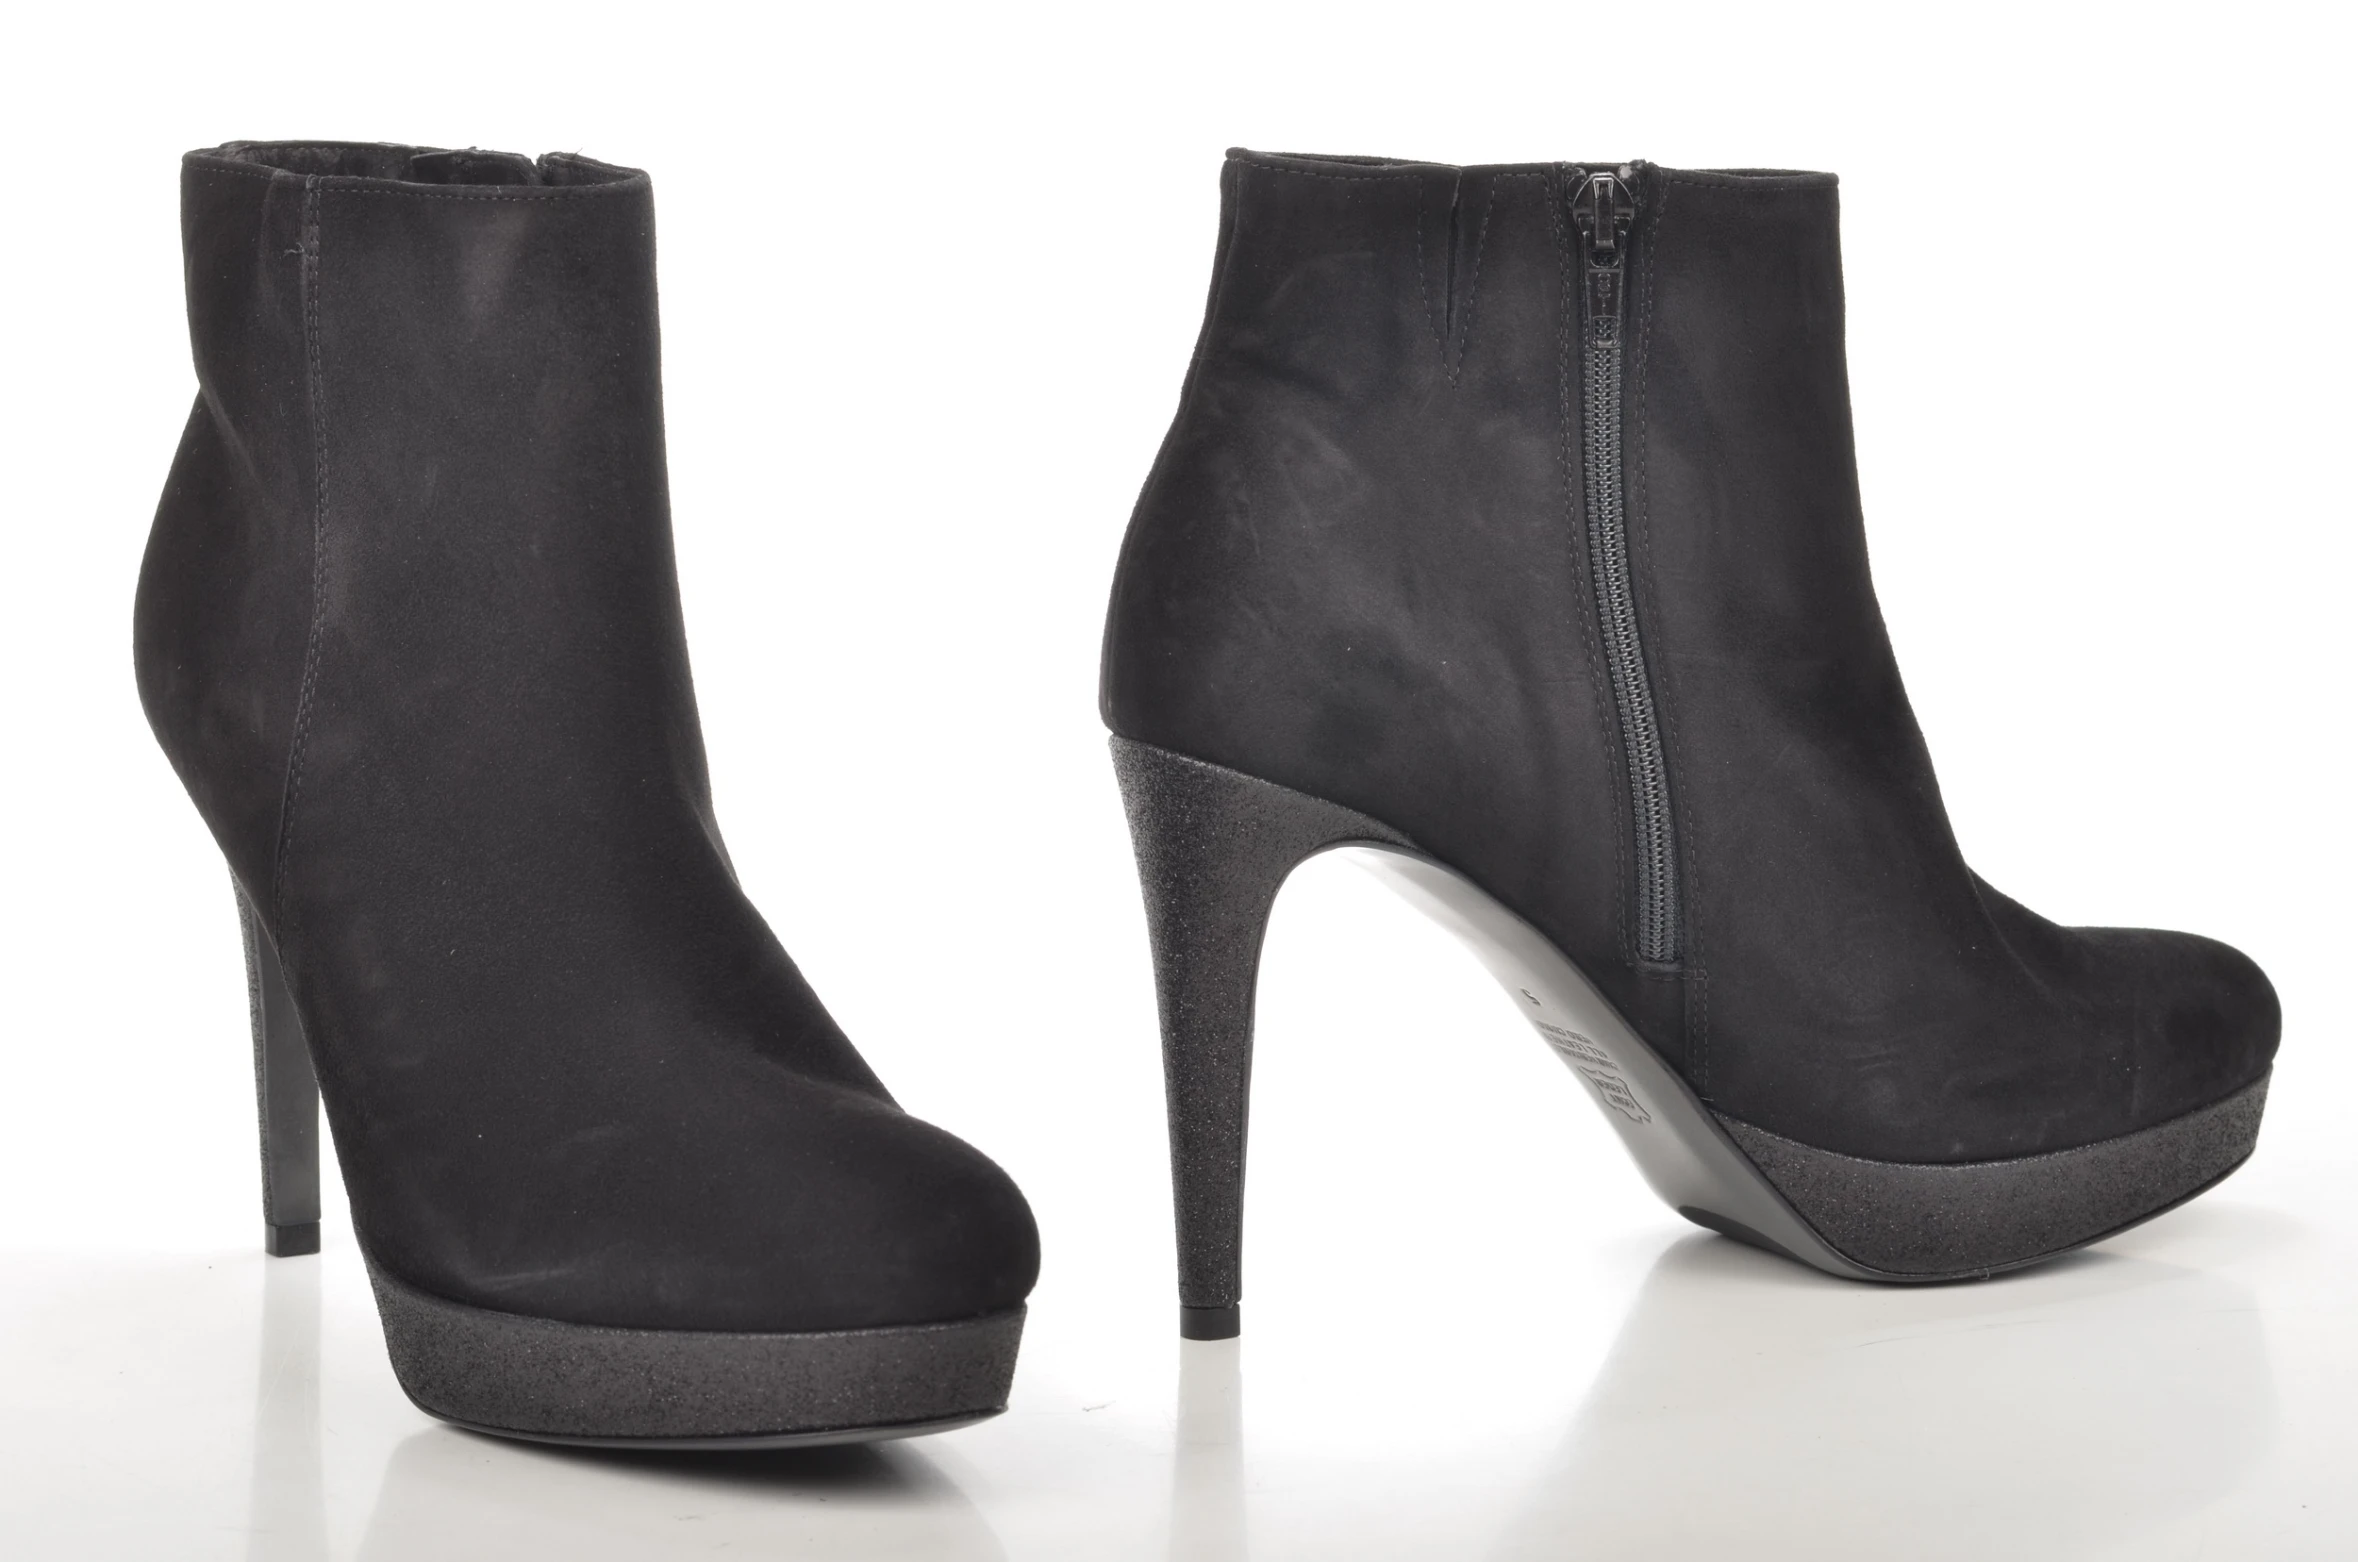 high heeled black boots with zippers